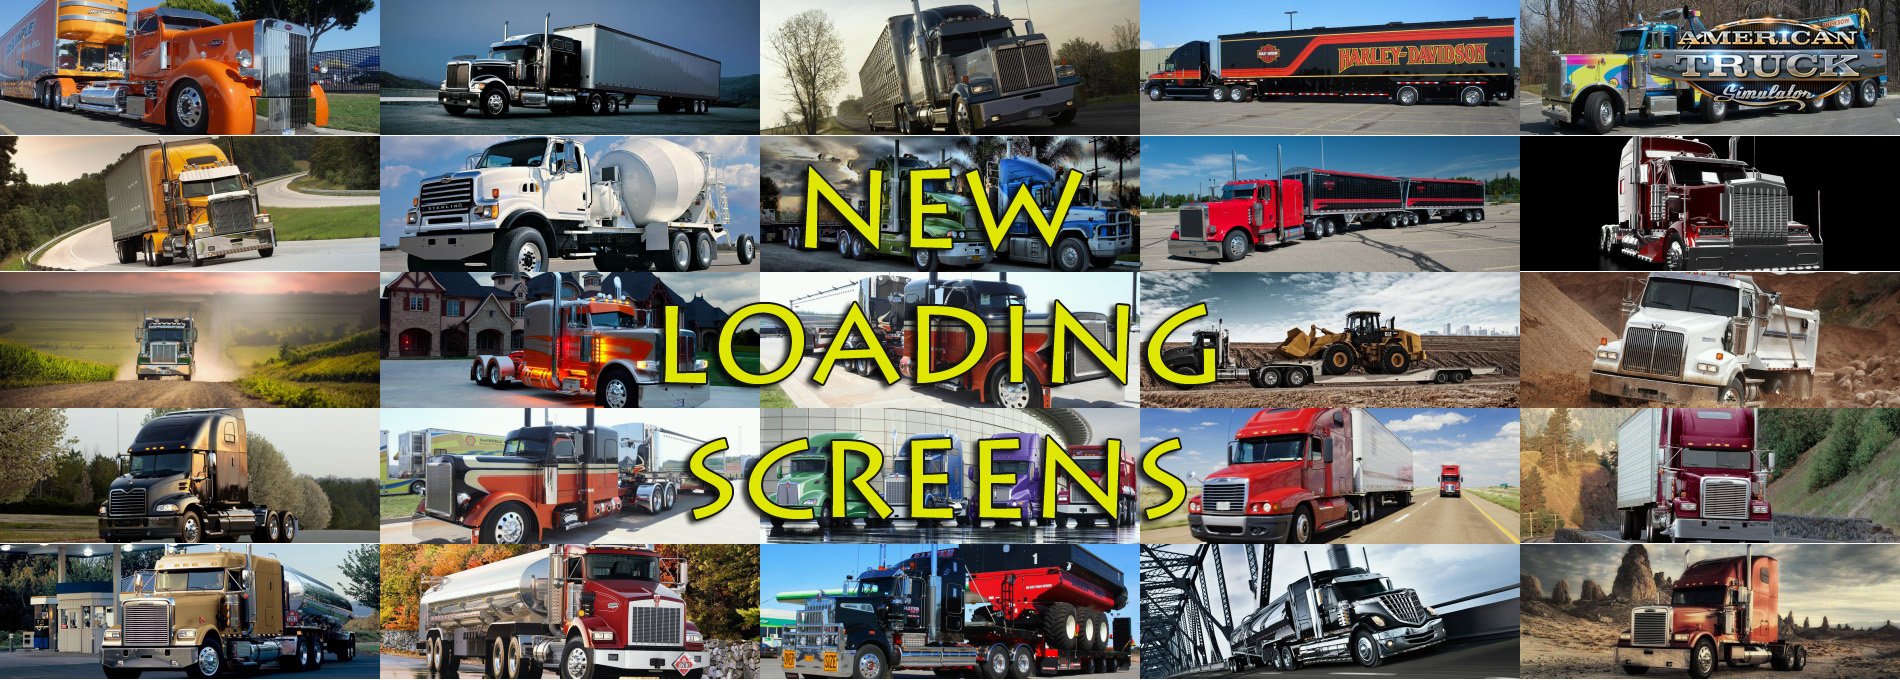 75 new loading screens for Ats